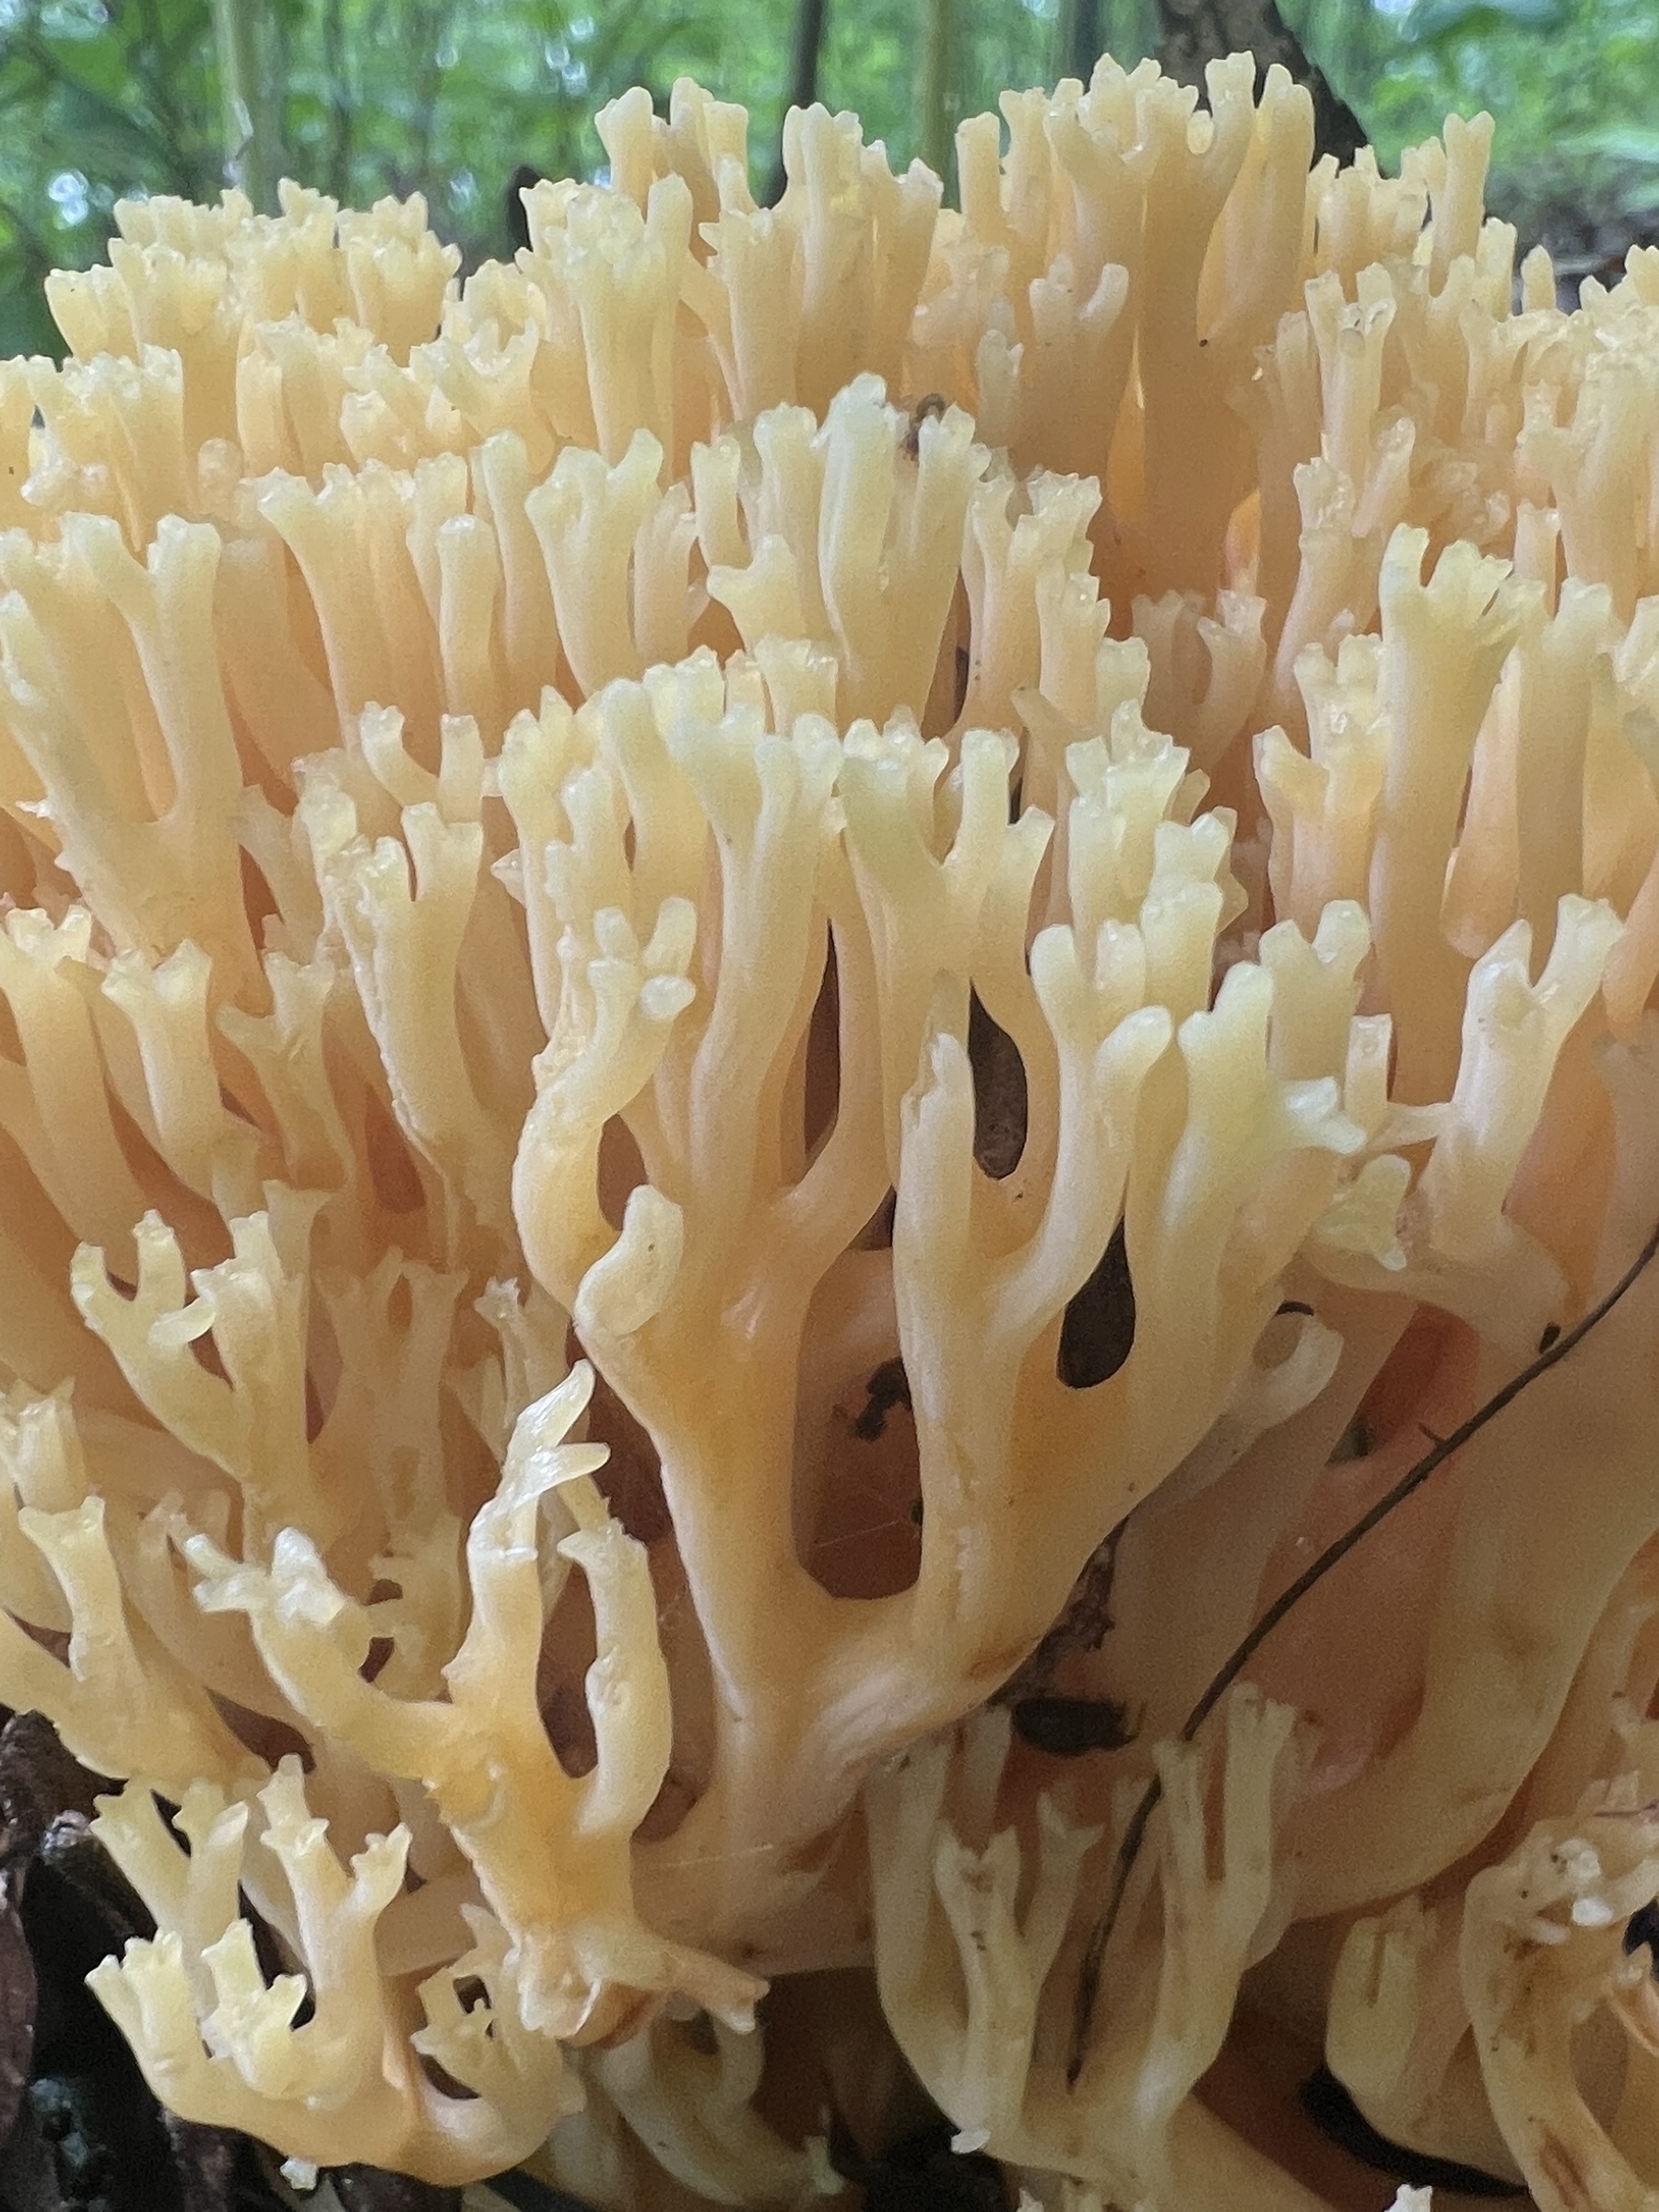 a cream colored coral fungi, which resembles coral found in the ocean, some think it resembles cauliflower hence the name